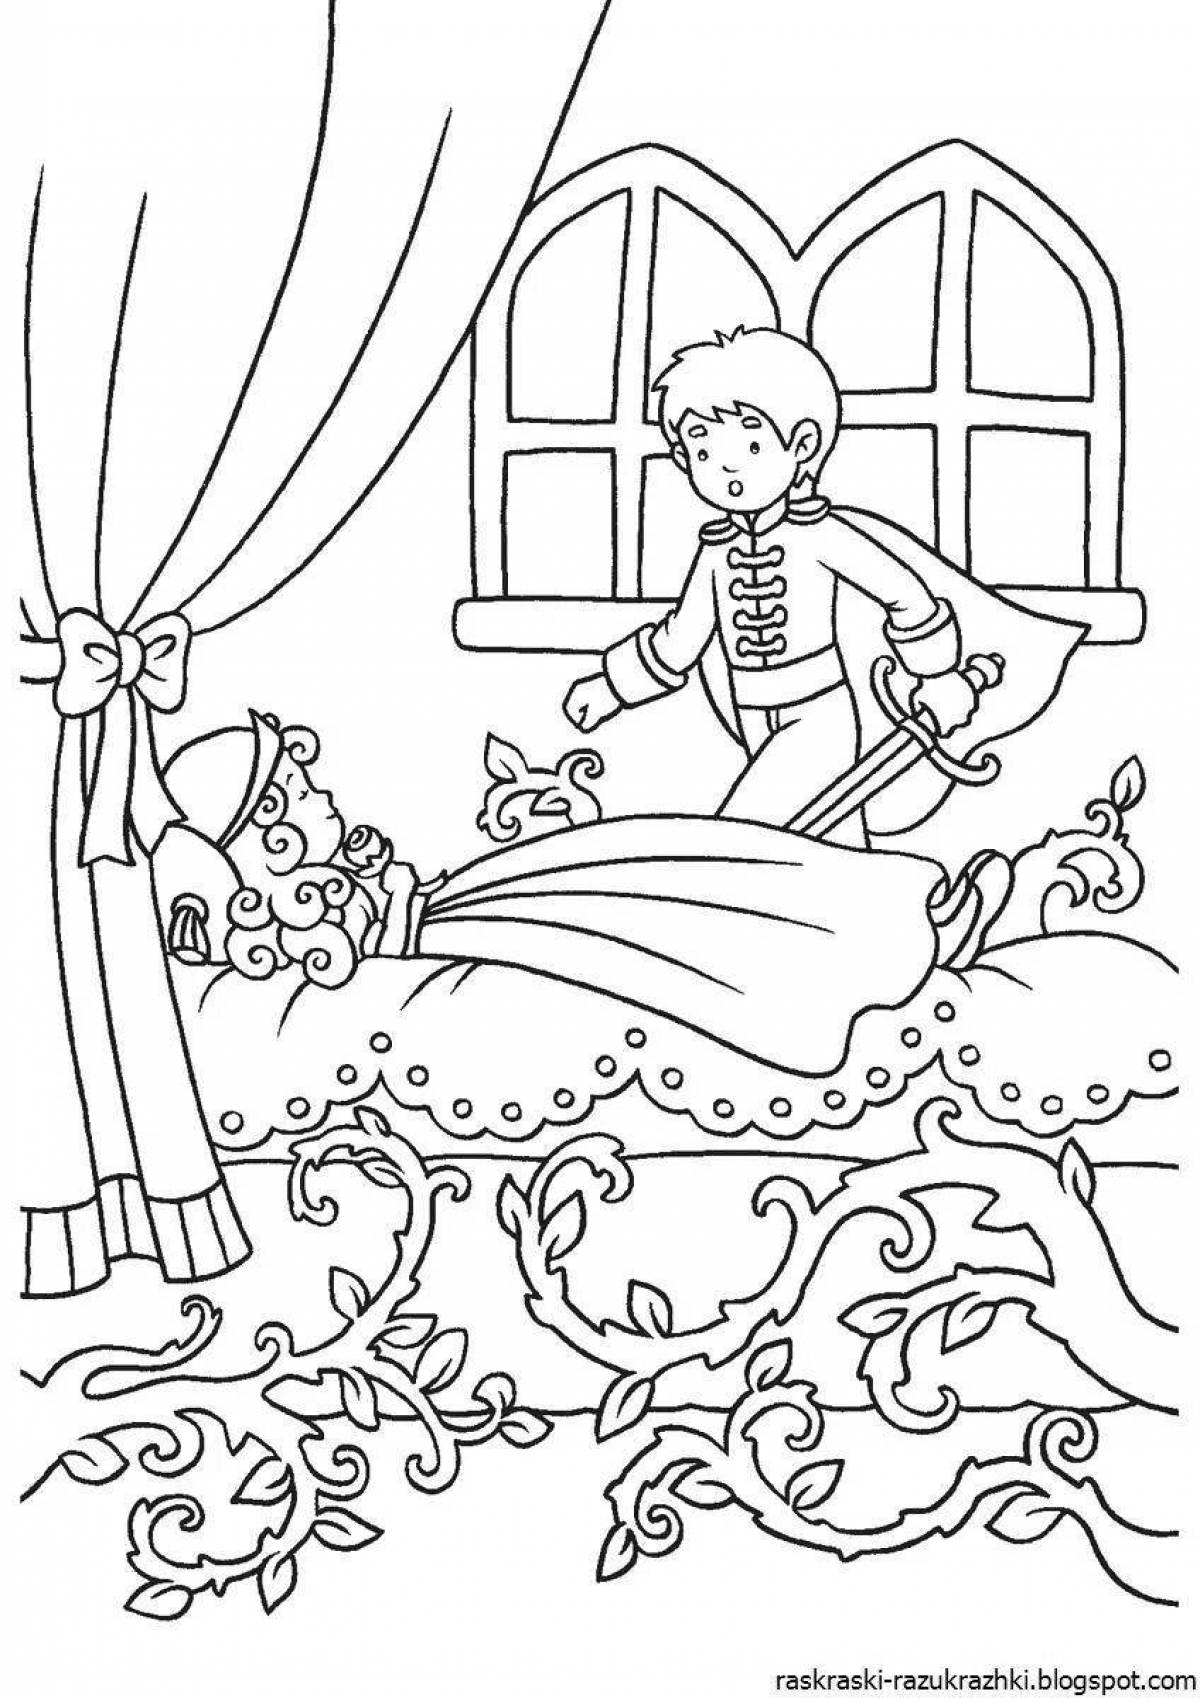 Generous coloring book heroes of fairy tales for 6 7 years